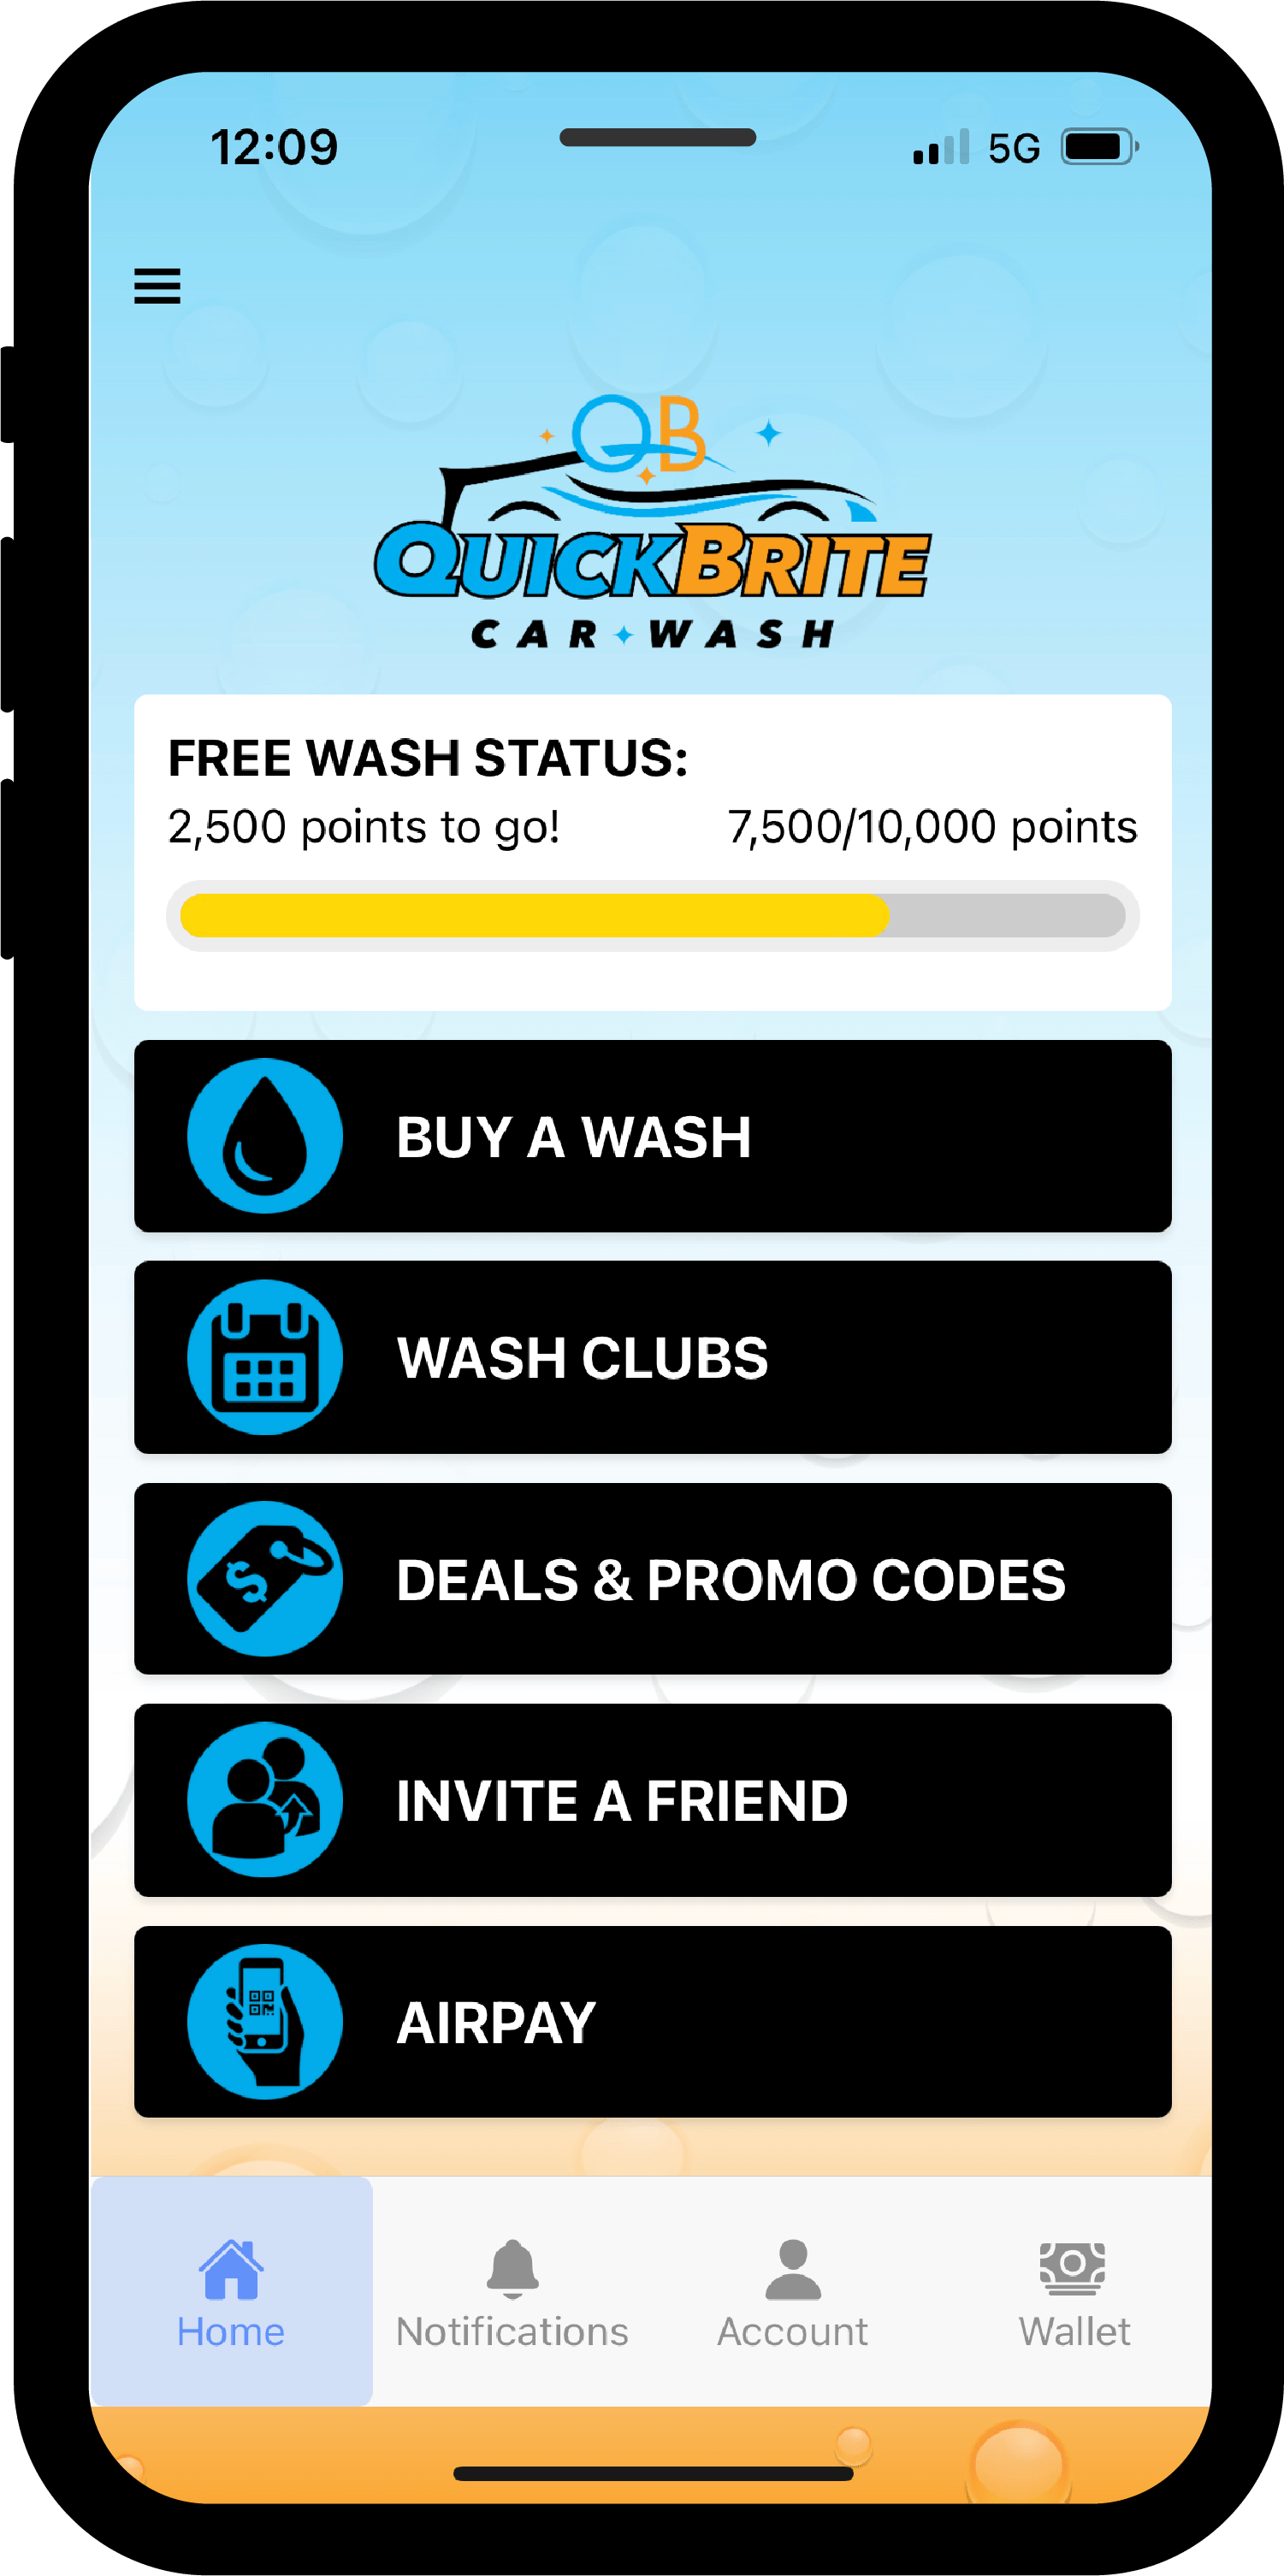 Get FREE Car Washes with Our APP | Quick Brite Car Wash | Avon, OH